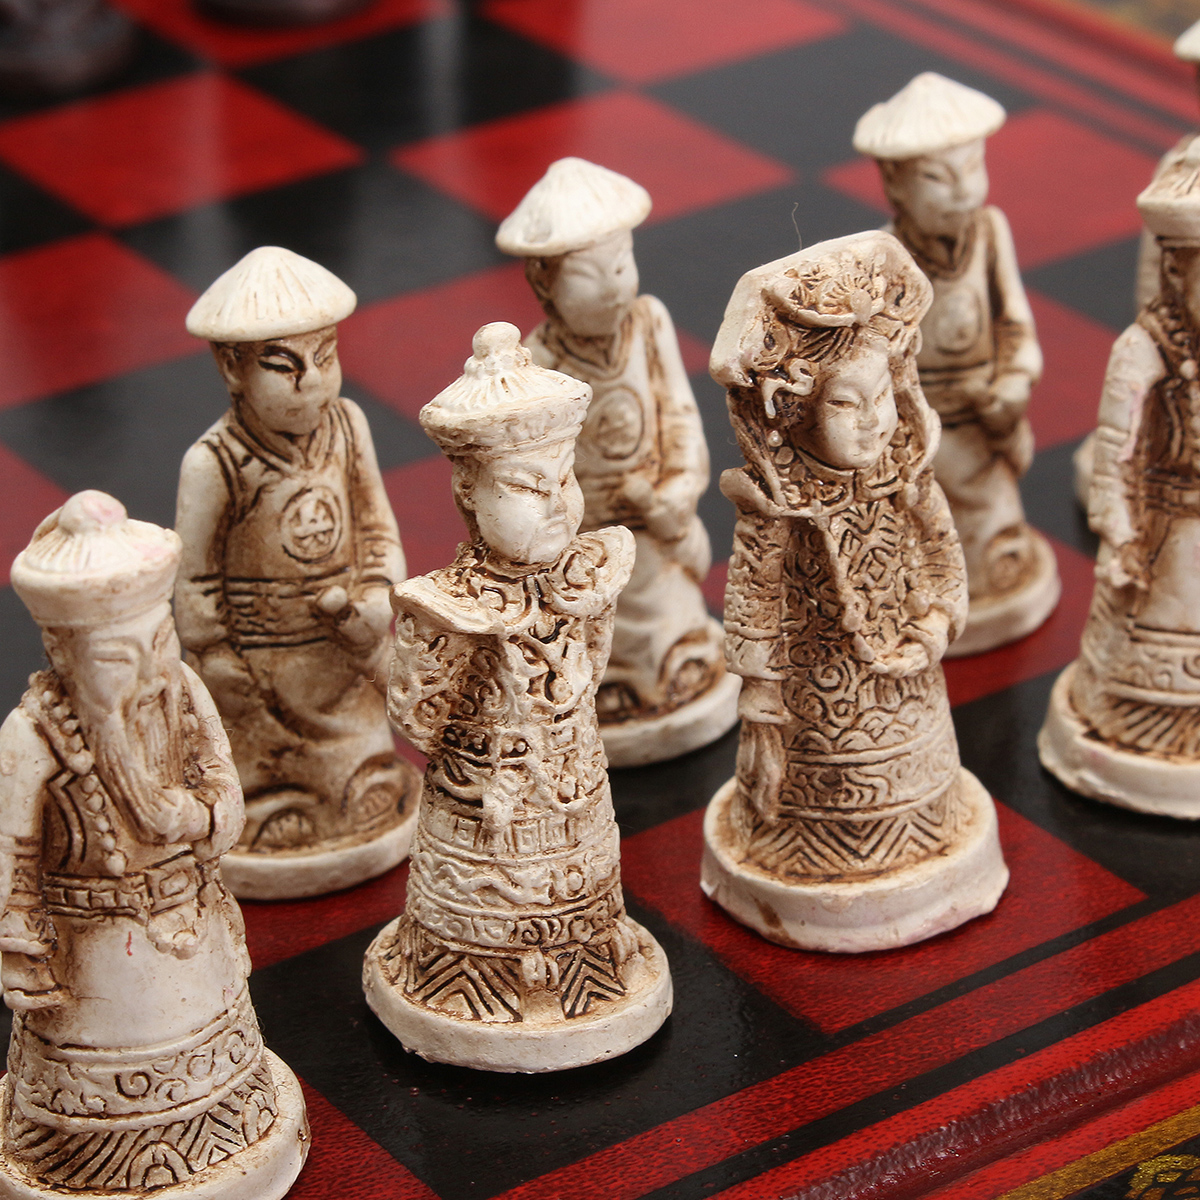 32PcsSet-Resin-Chinese-Chess-With-Coffee-Wooden-Table-Vintage-Collectibles-Gift-1108169-6